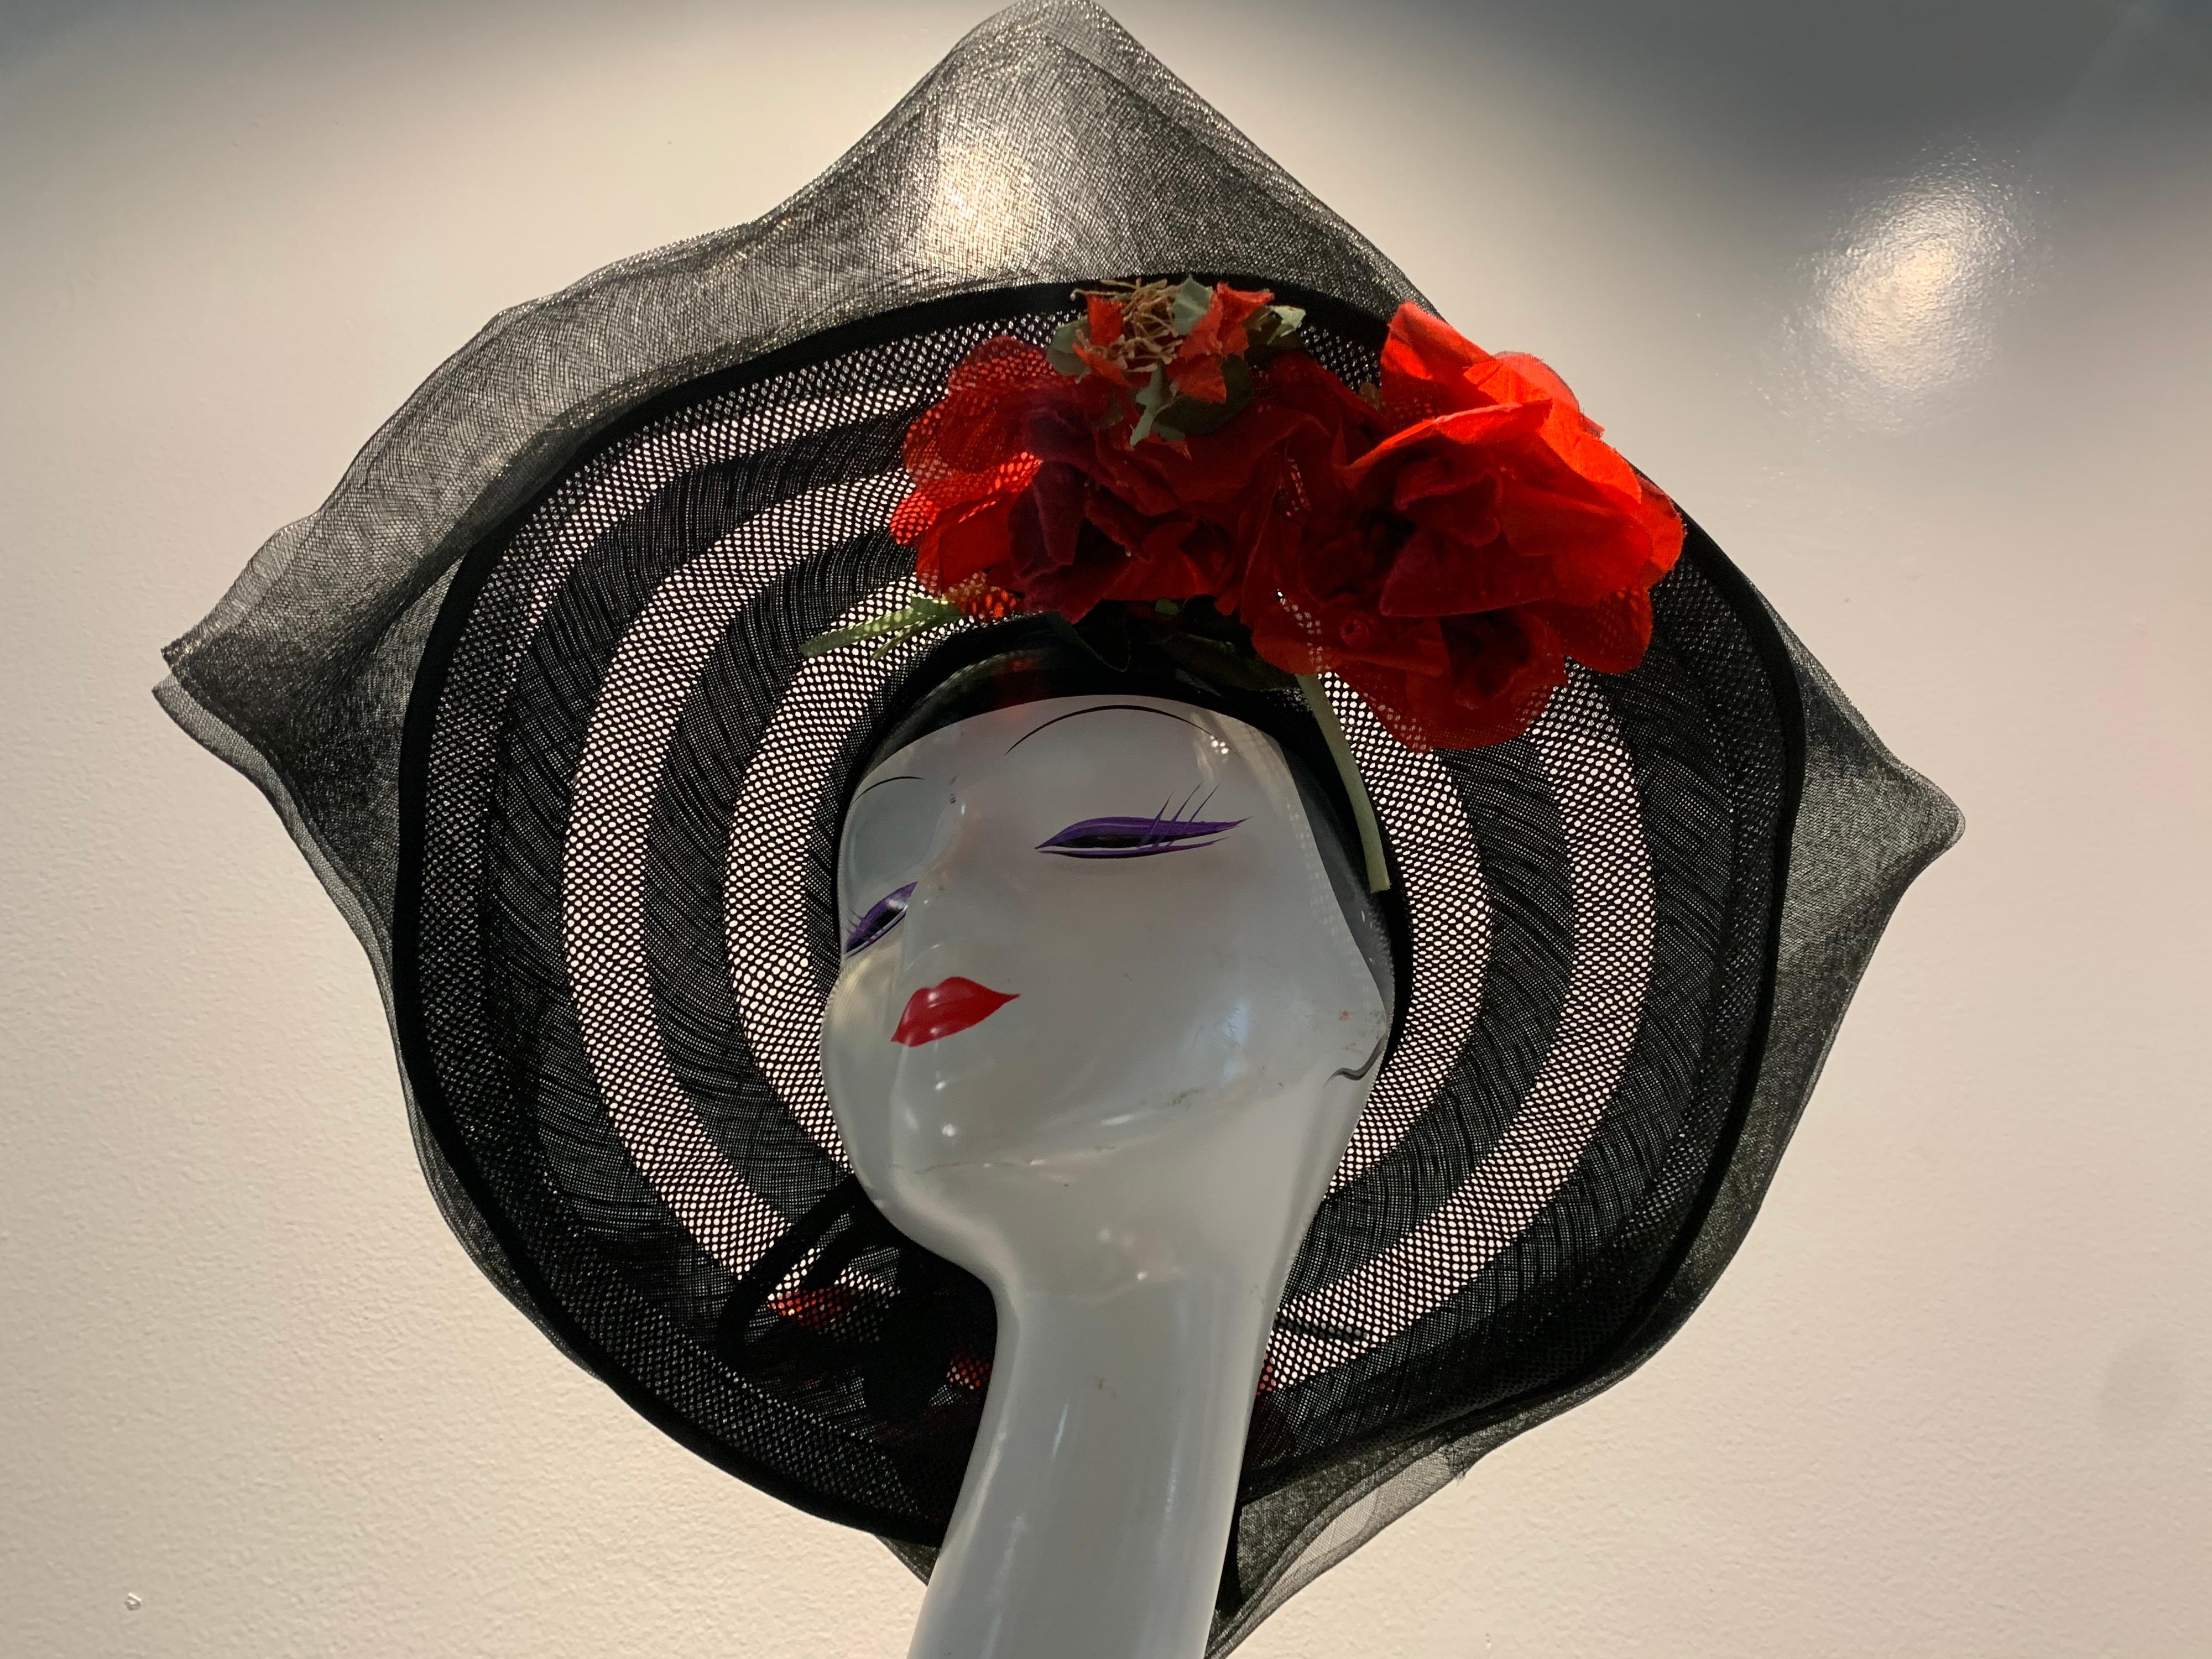 1940s Howard Hodge black horsehair braid picture hat with ruffled asymmetric brim, velvet band and vibrant red silk poppies at side. Rounded high crown. Originally sold at Vandervoorts - French Room. Size Medium.